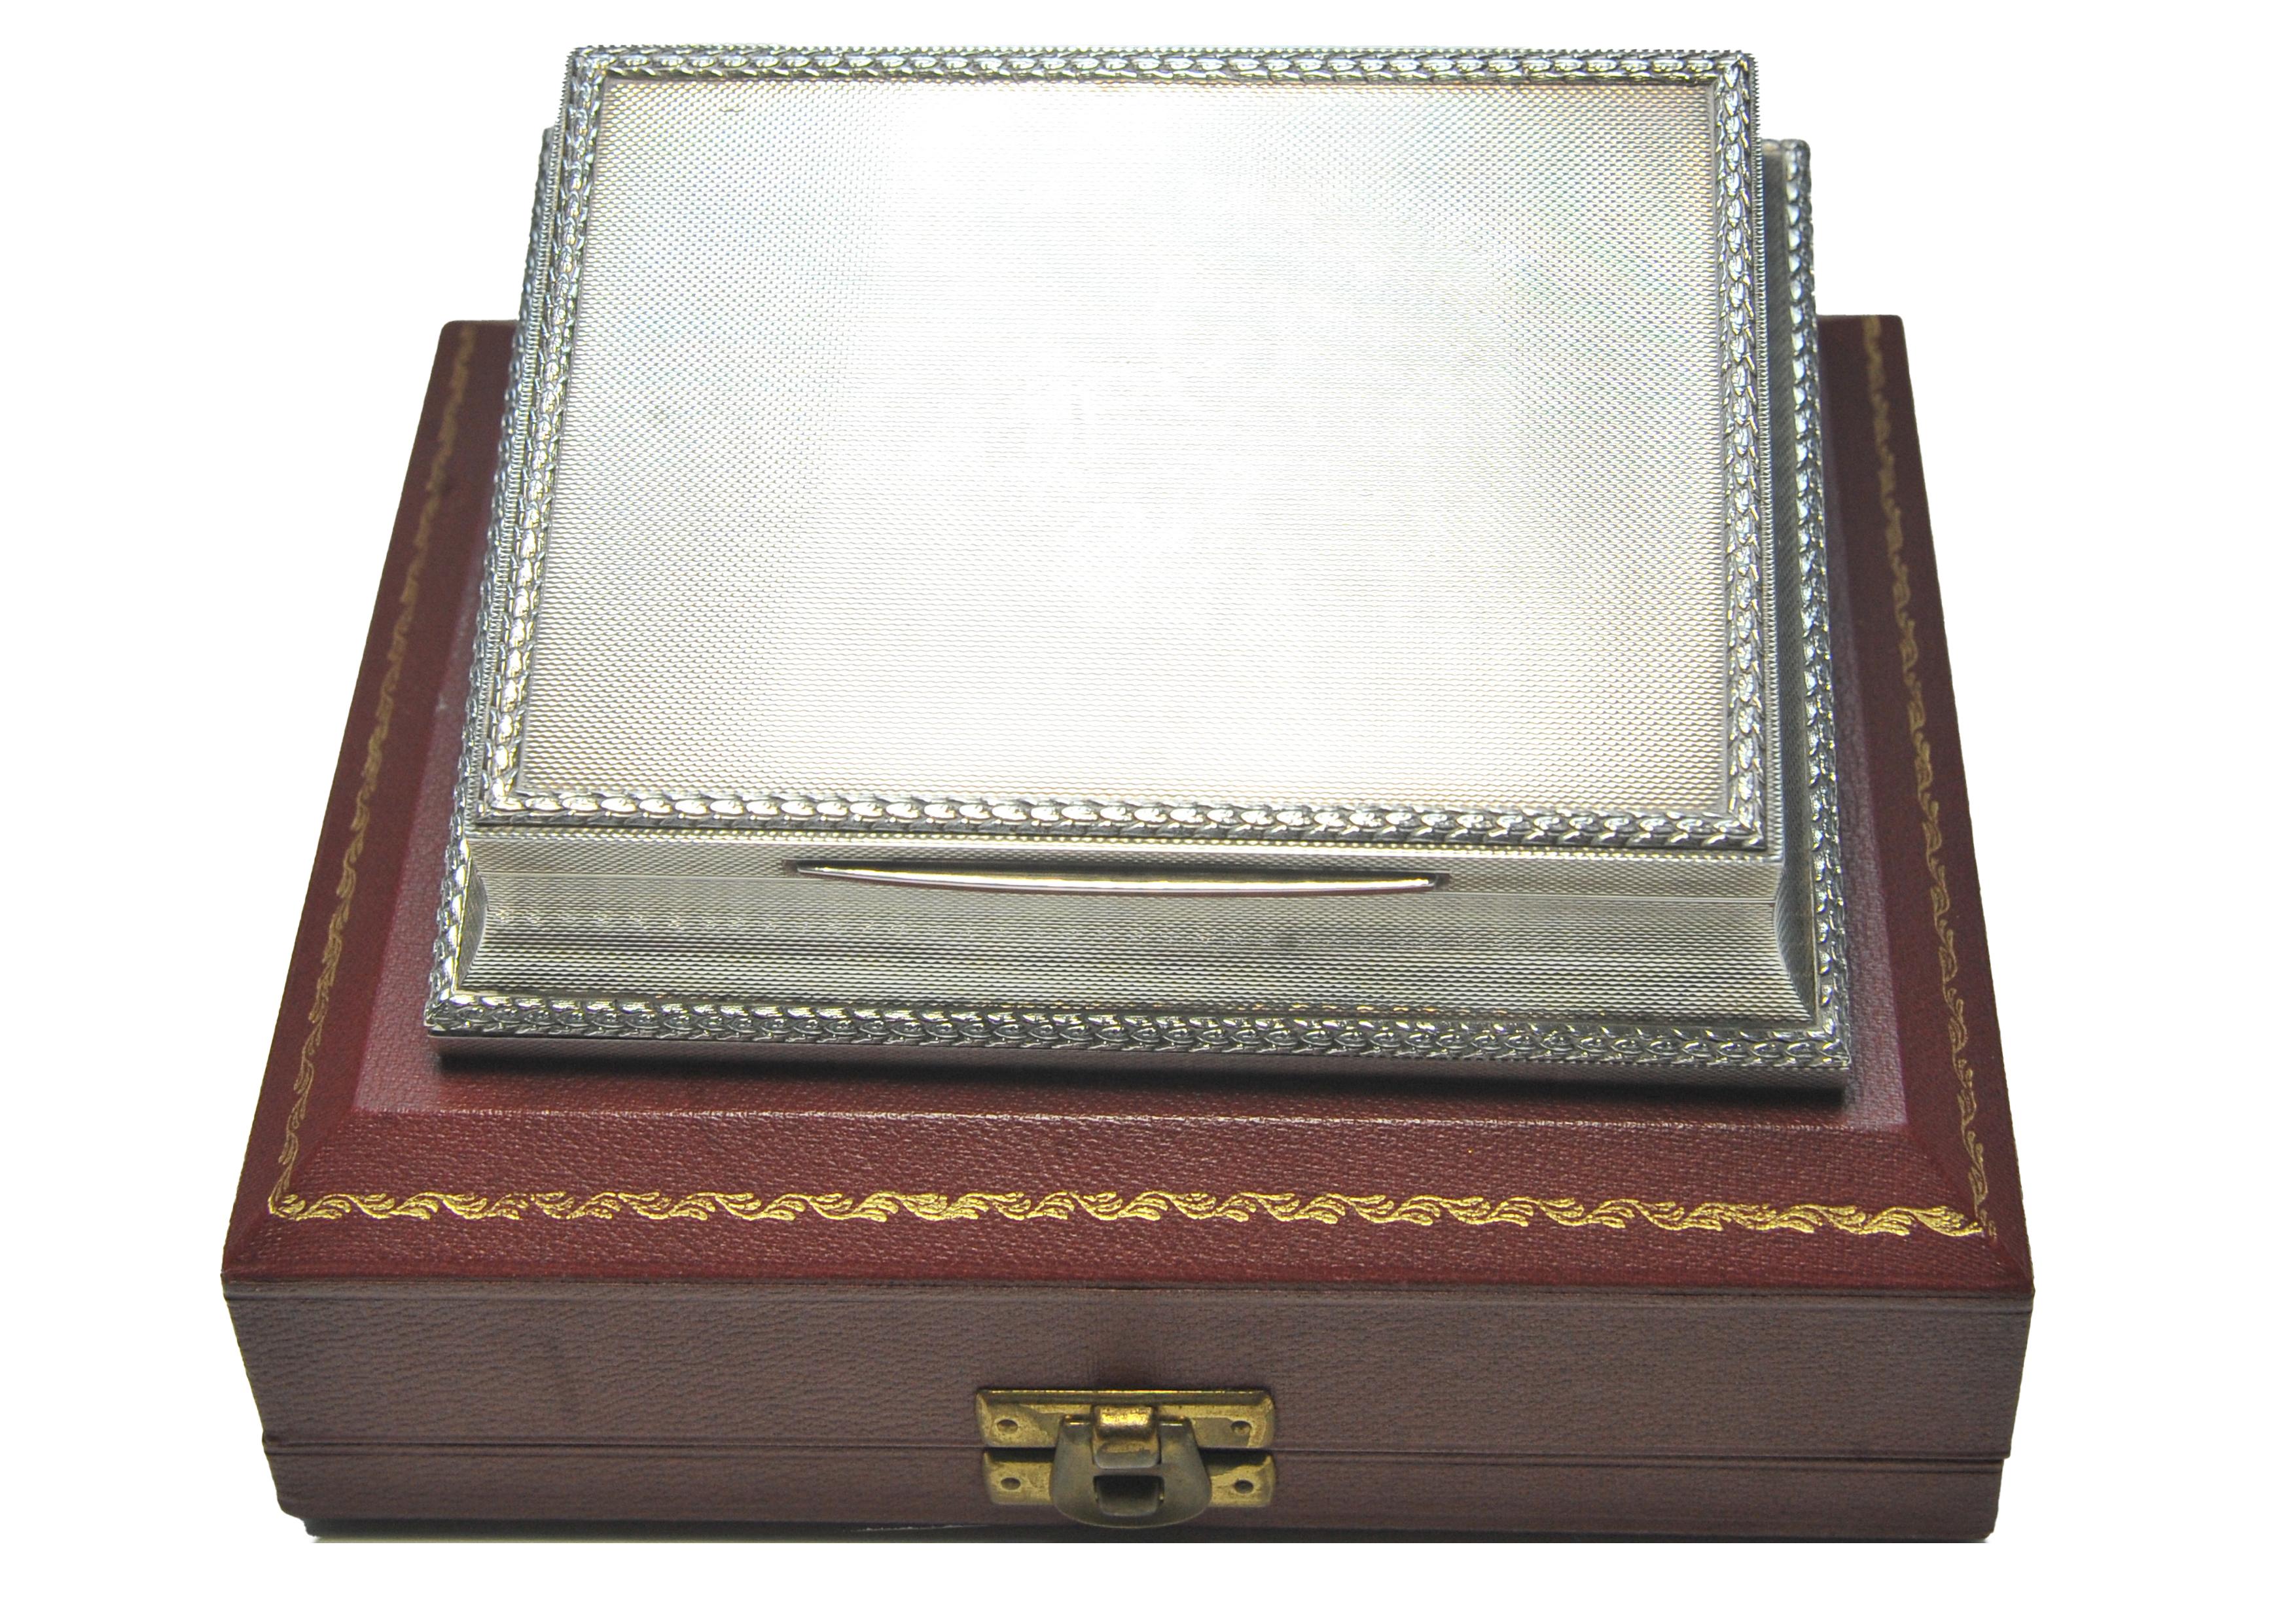 A Sterling Silver Hallmarked Engine Turned Cigarette Presentation Box With A Textured Border, by Asprey & Co London.
Within an original Asprey & Co fitted case.
Weight of silver 475g

Marked 1958

Within the gilt lined hinged lid is an engraving.